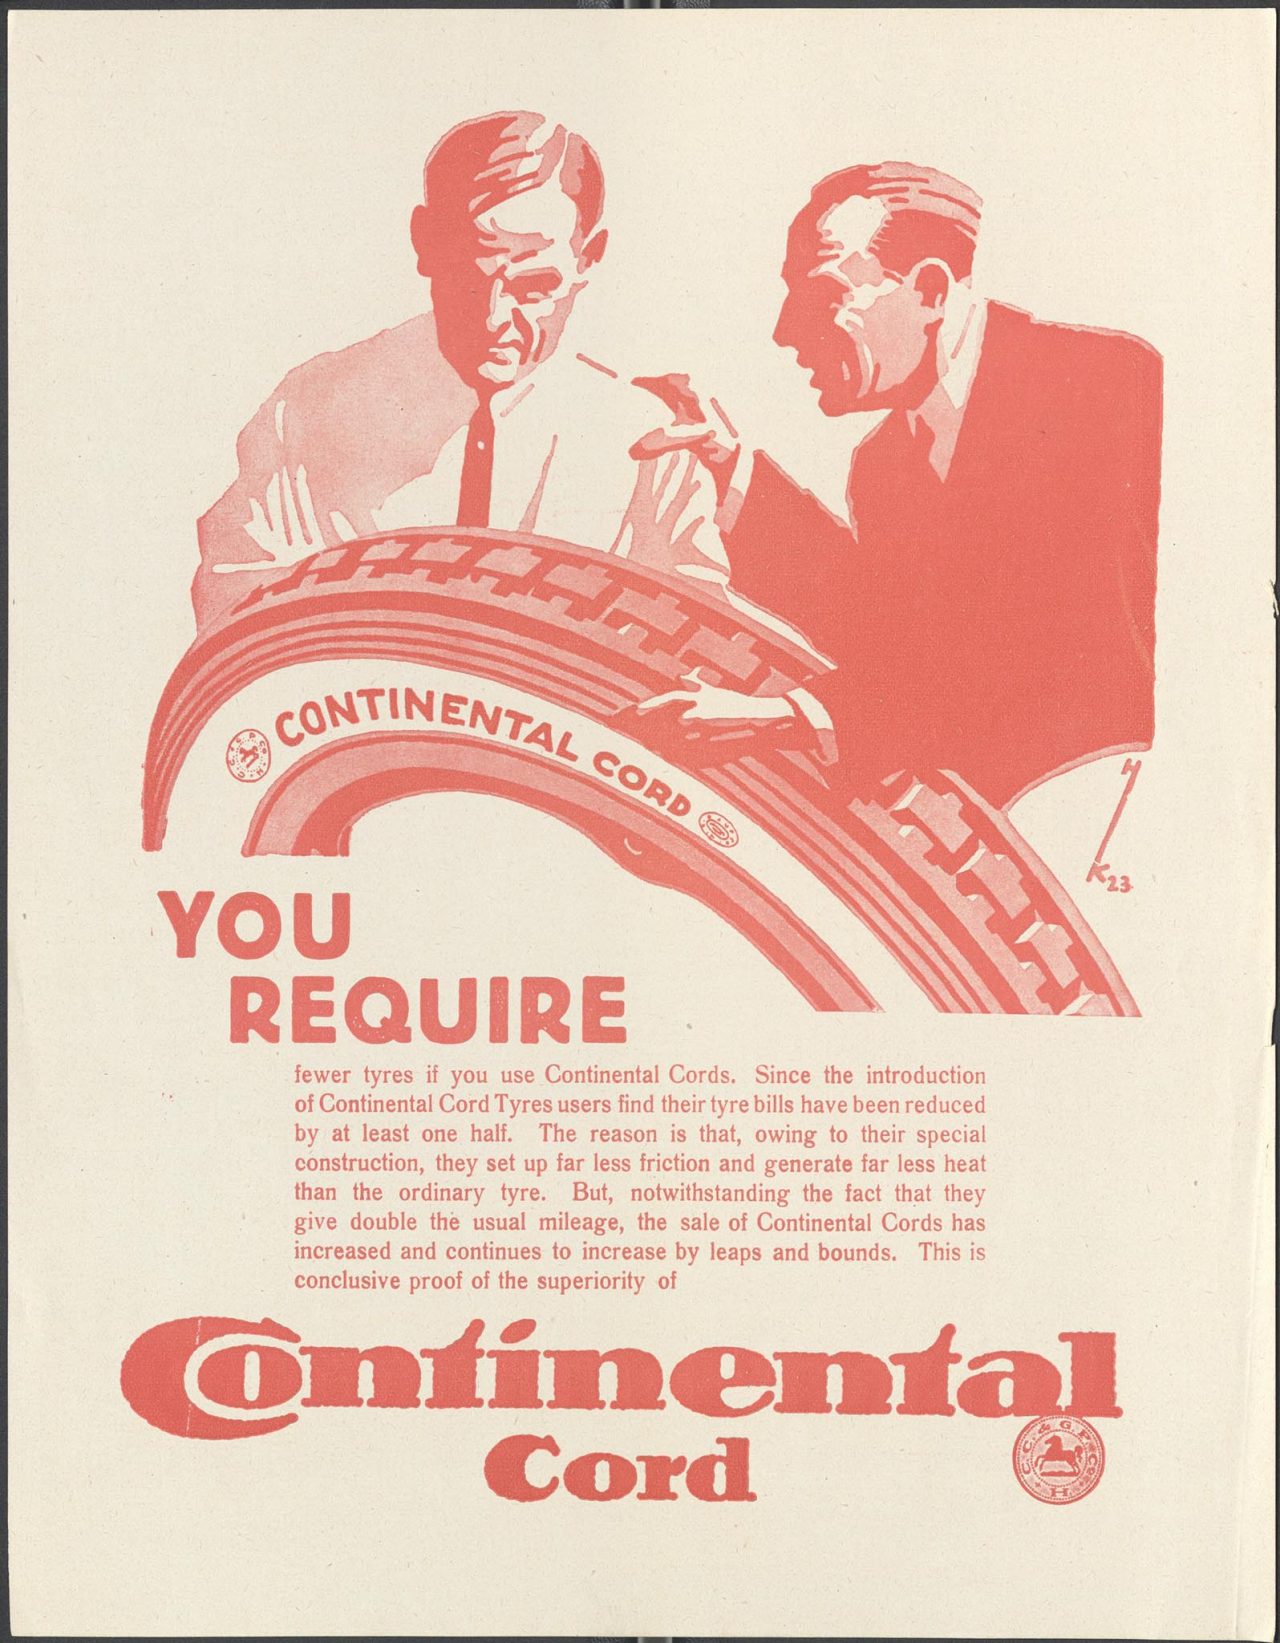 Advertising Continental Cord tires began early 